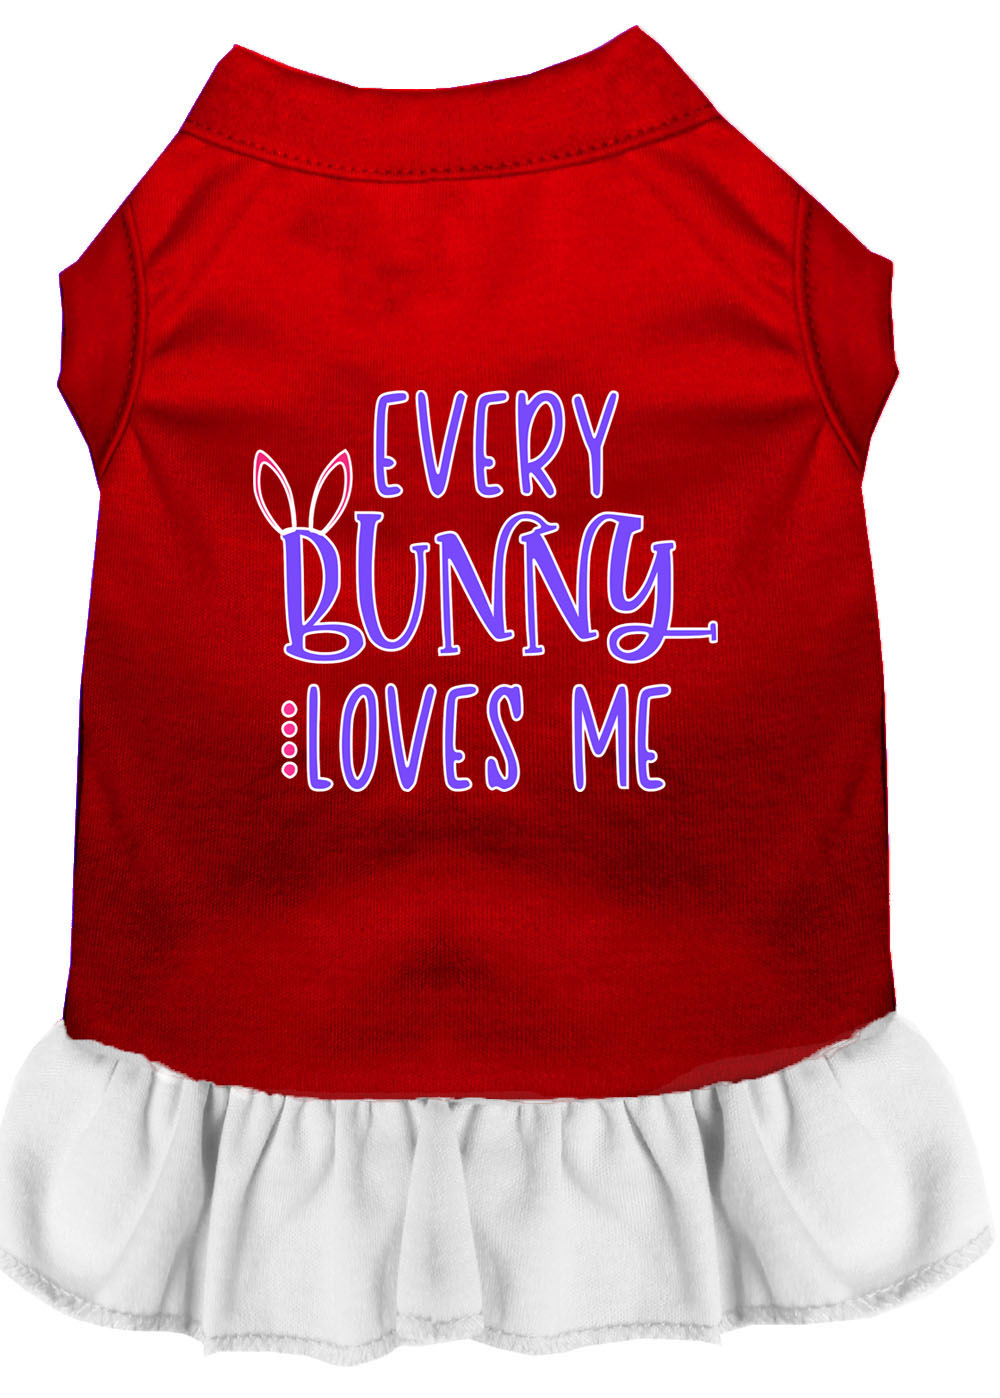 Every Bunny Loves me Screen Print Dog Dress Red with White Sm